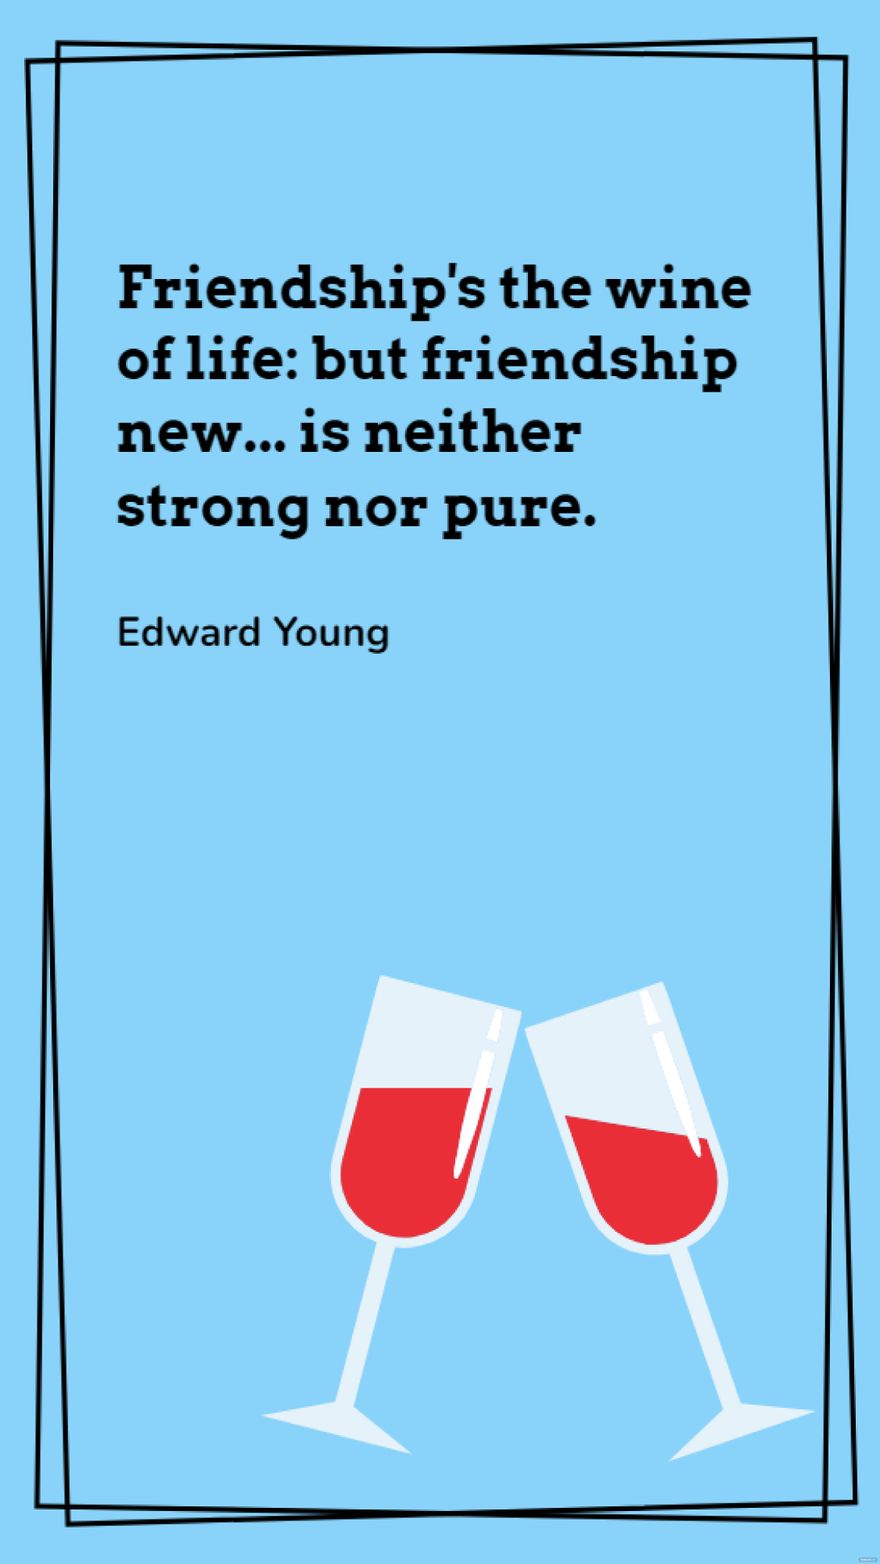 Edward Young - Friendship's the wine of life: but friendship new... is neither strong nor pure. in JPG